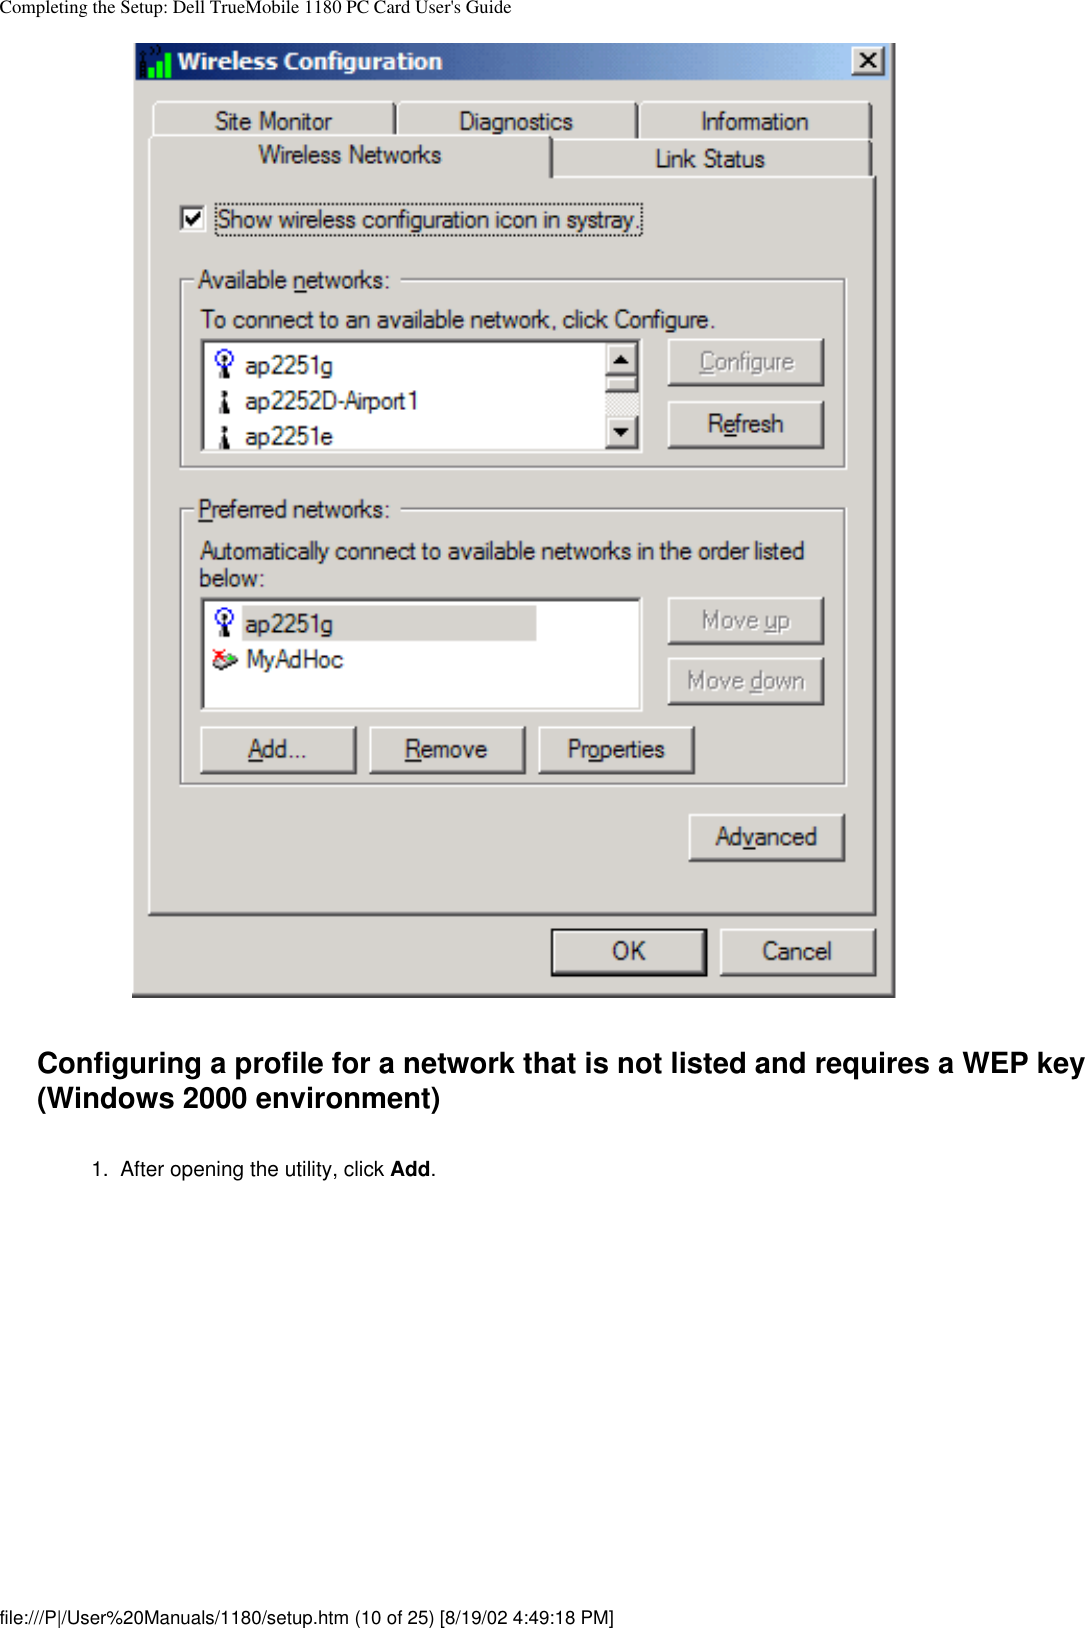 Completing the Setup: Dell TrueMobile 1180 PC Card User&apos;s GuideConfiguring a profile for a network that is not listed and requires a WEP key (Windows 2000 environment)1.  After opening the utility, click Add. file:///P|/User%20Manuals/1180/setup.htm (10 of 25) [8/19/02 4:49:18 PM]